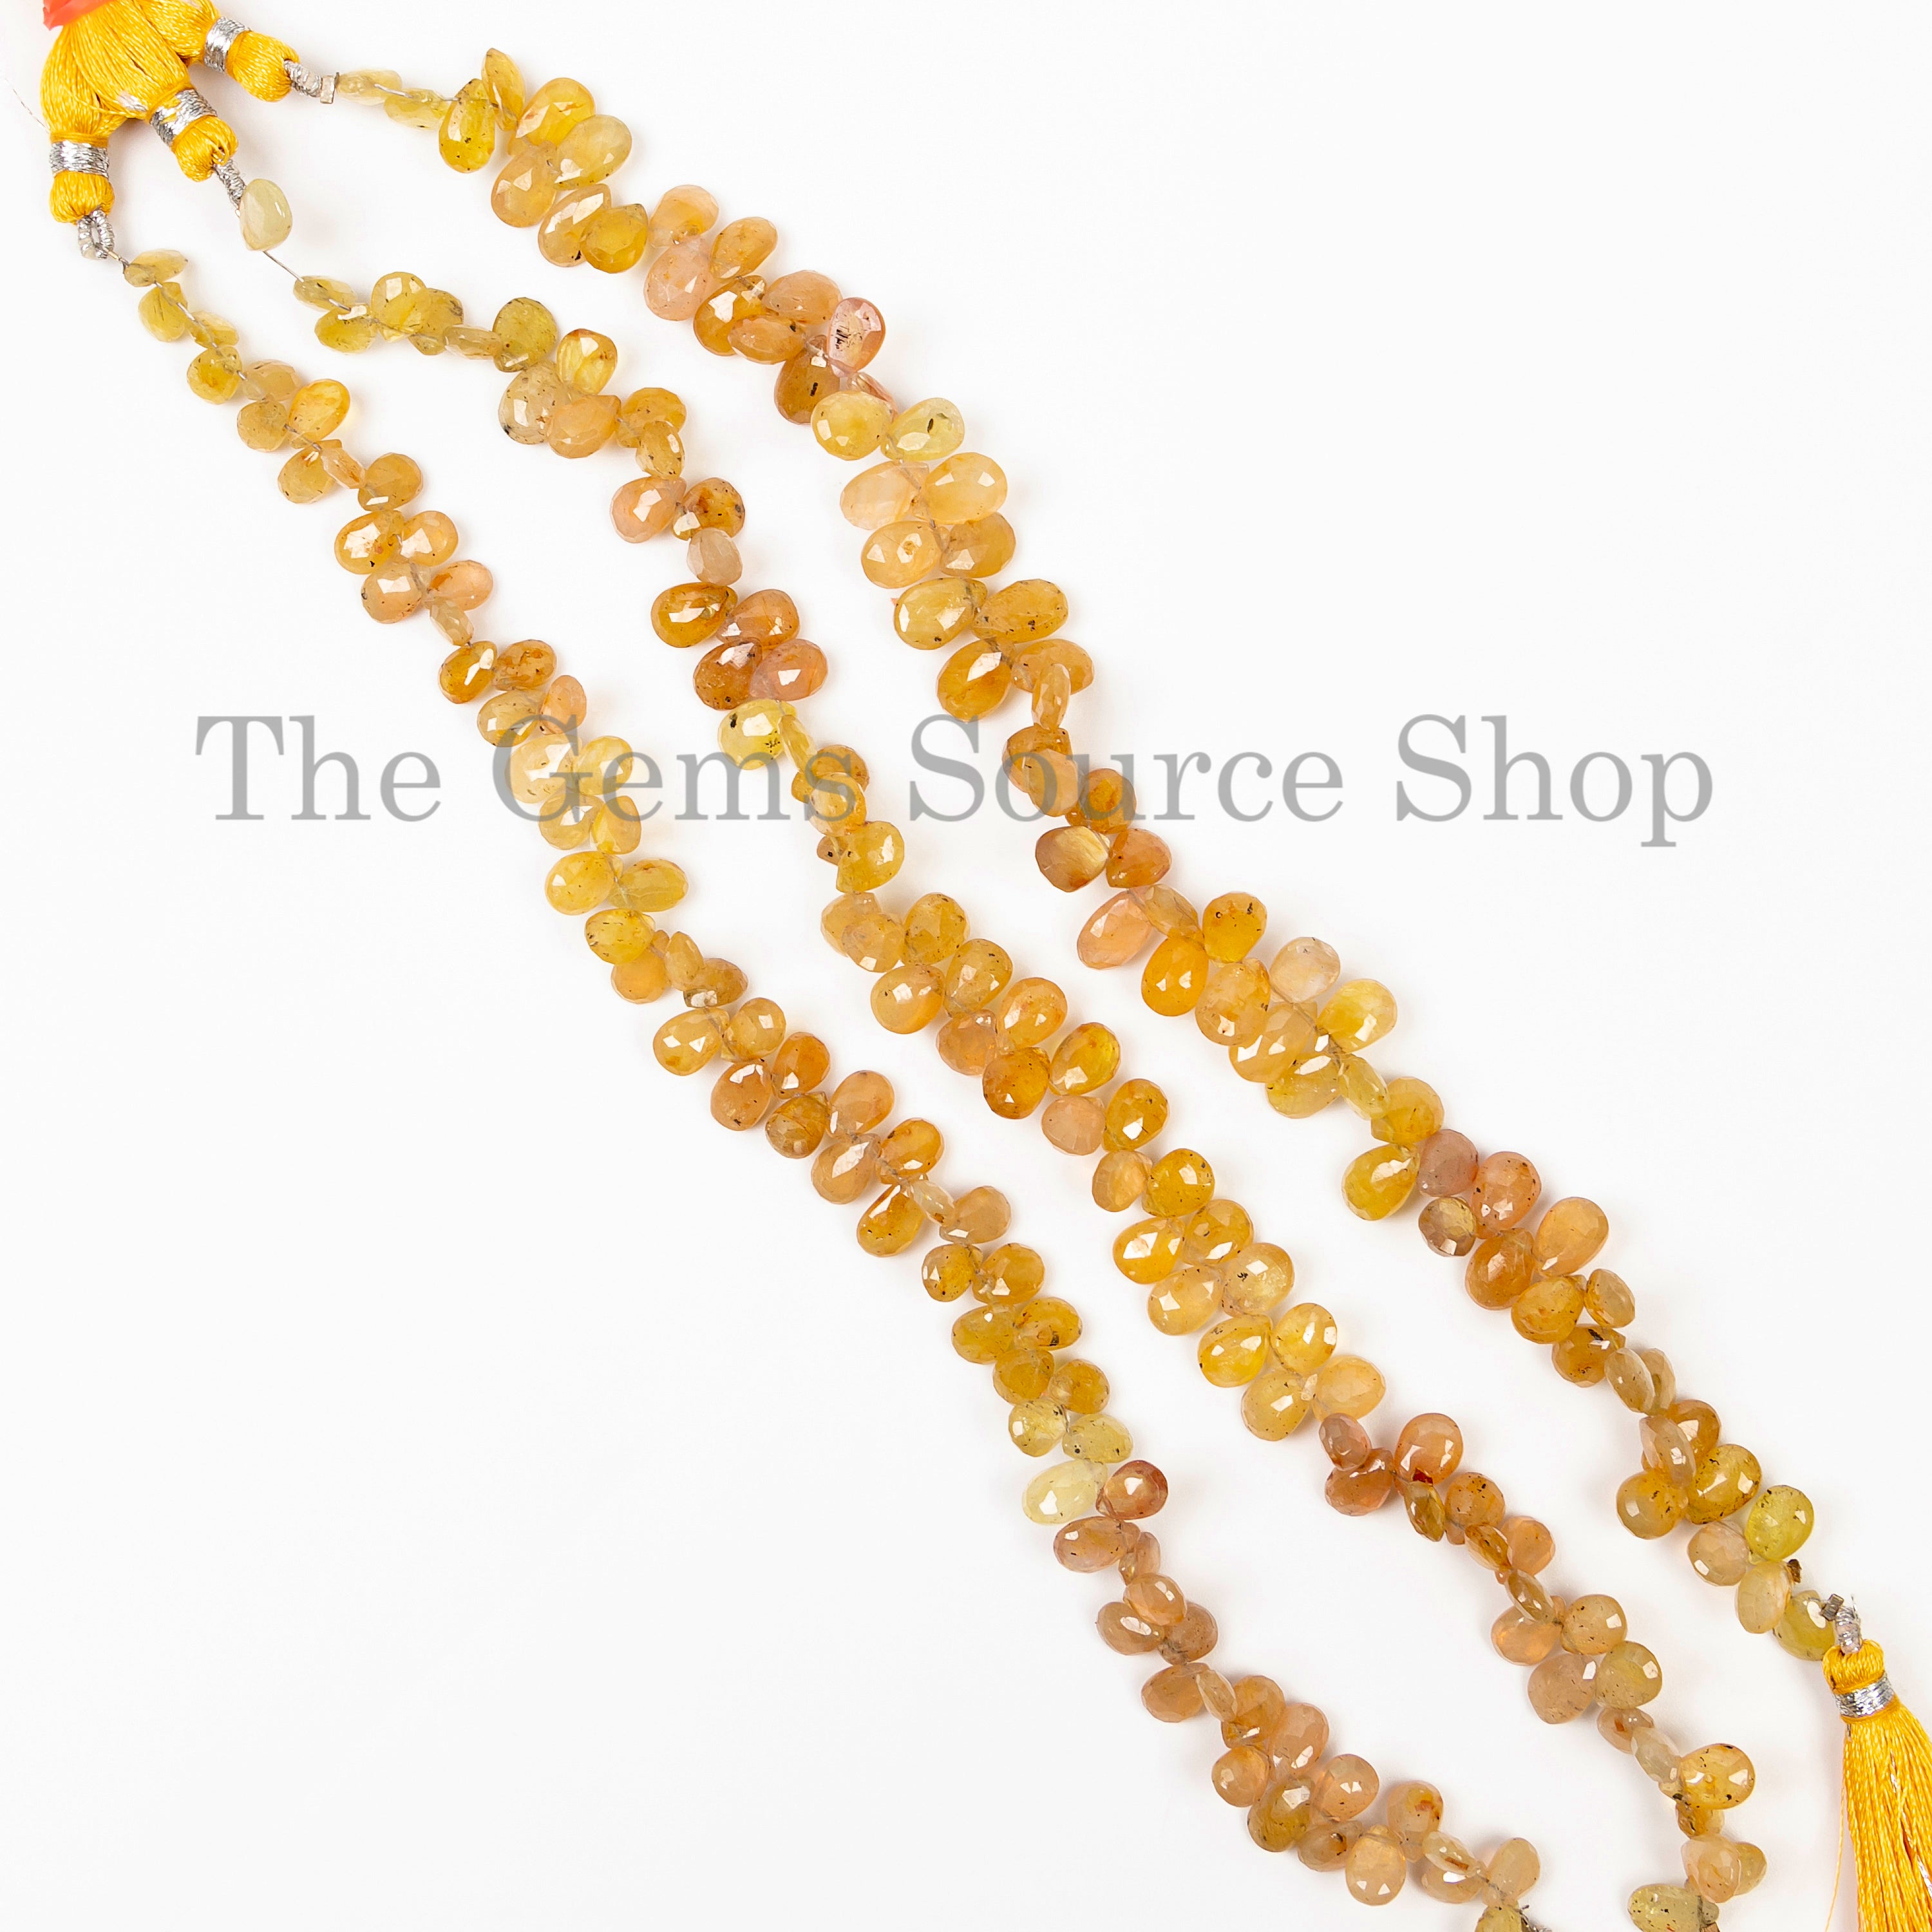 Yellow Sapphire Faceted Pear Beads, 5X7-6X8mm Natural Sapphire Faceted Pear Shape Beads for Jewelry Making. TGS-5050